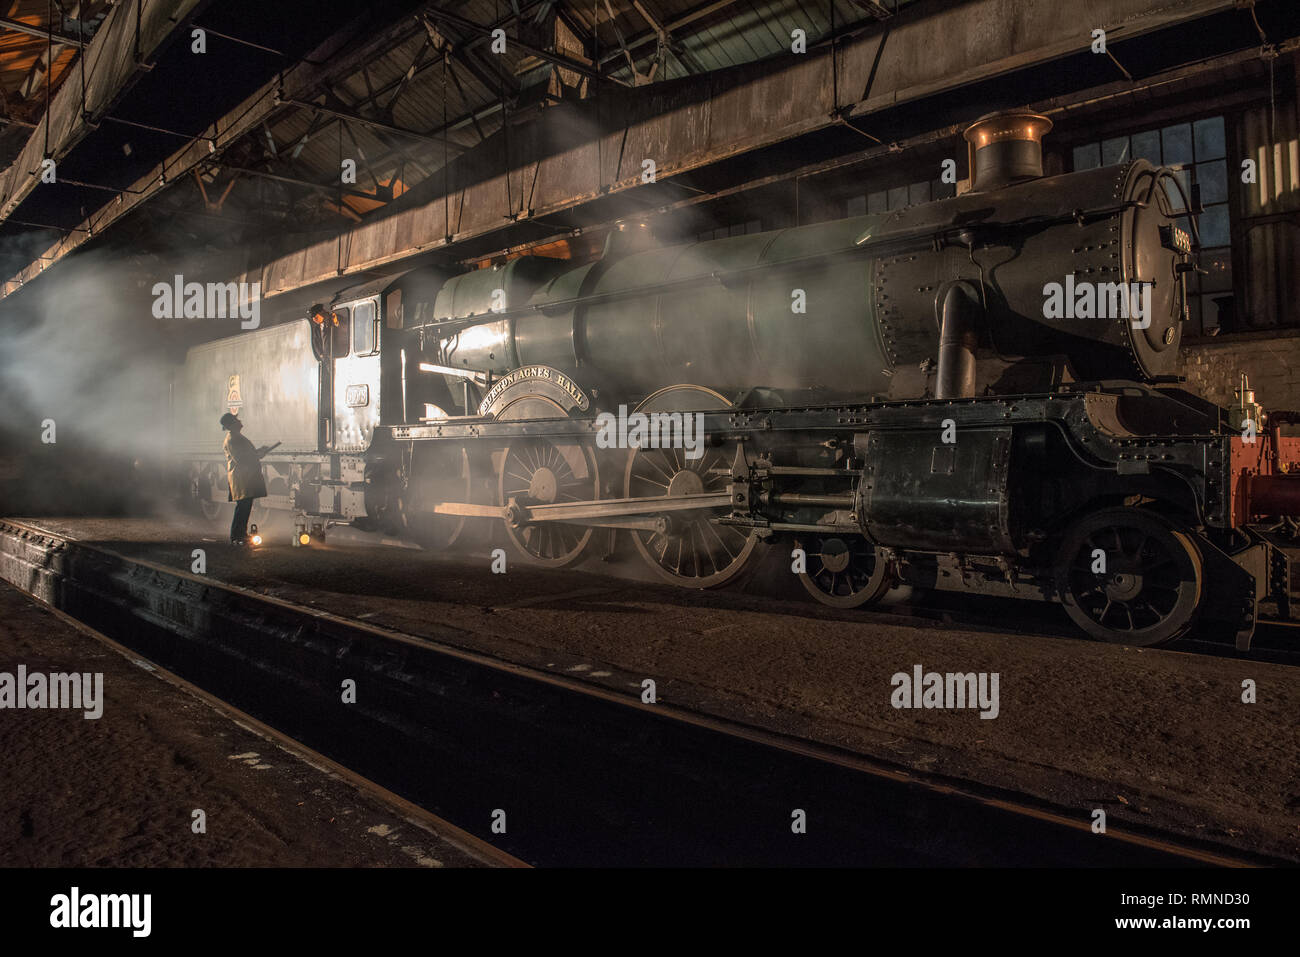 Cold Winter's Evening in a Train Shed Stock Photo